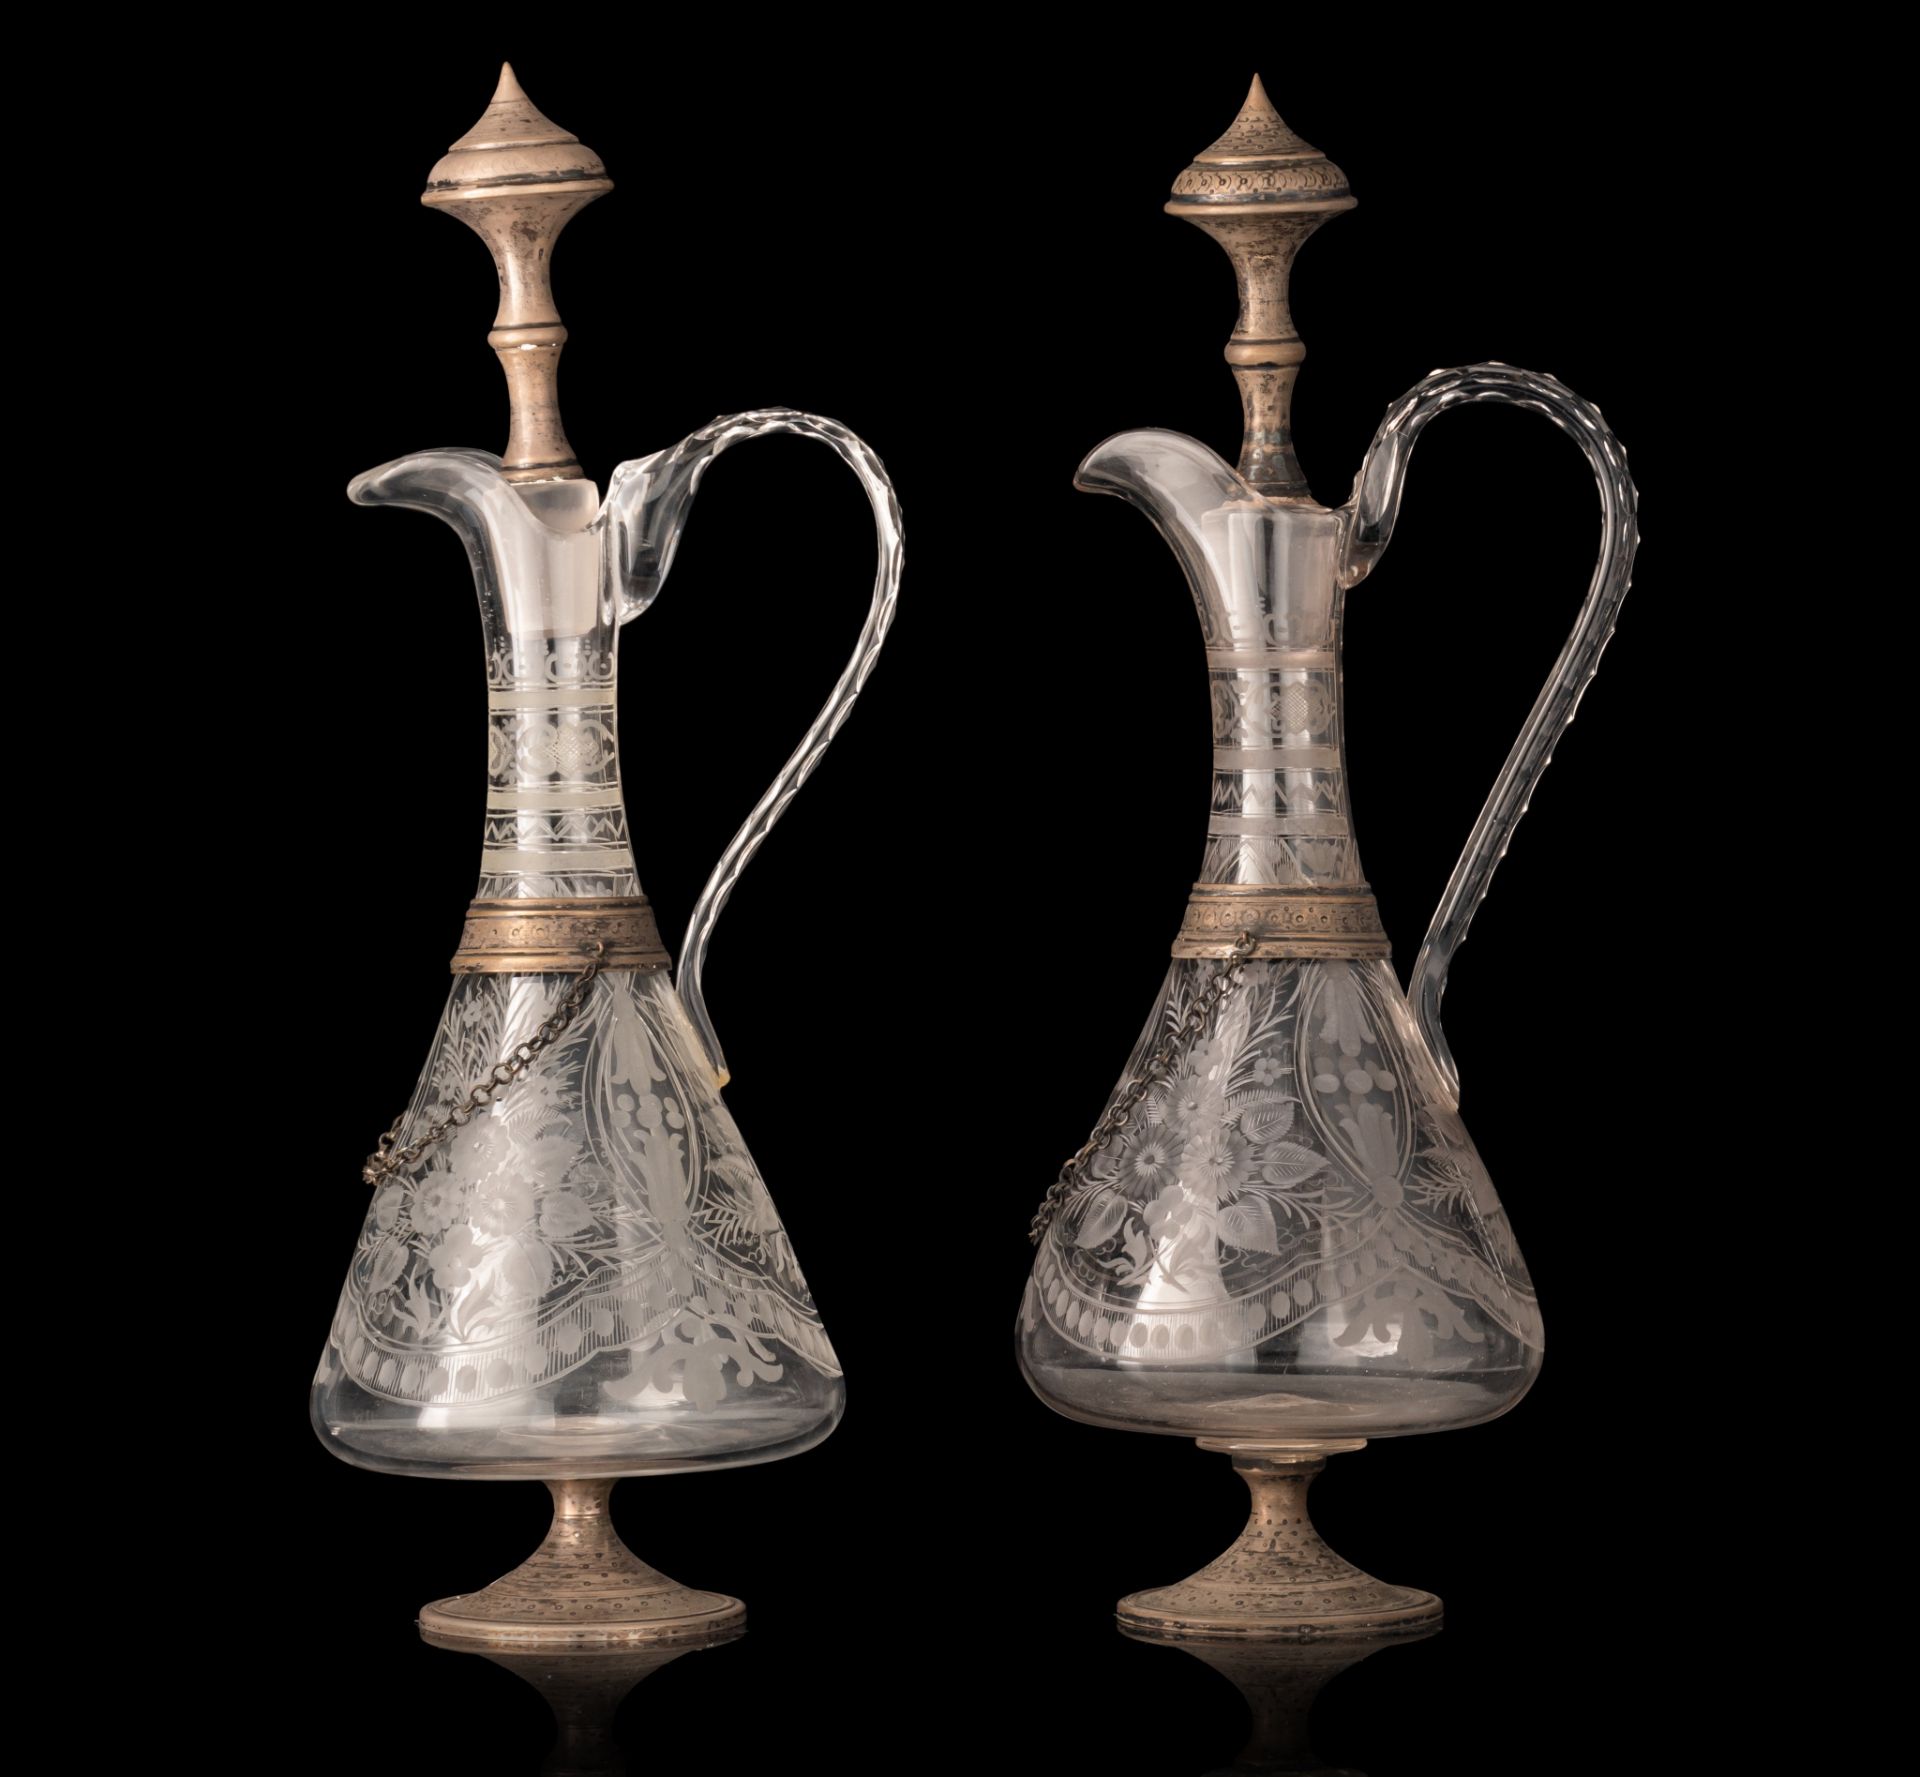 A pair of glass, silver-plated brass mounted decanters, H 41 - 42 cm - Image 3 of 7